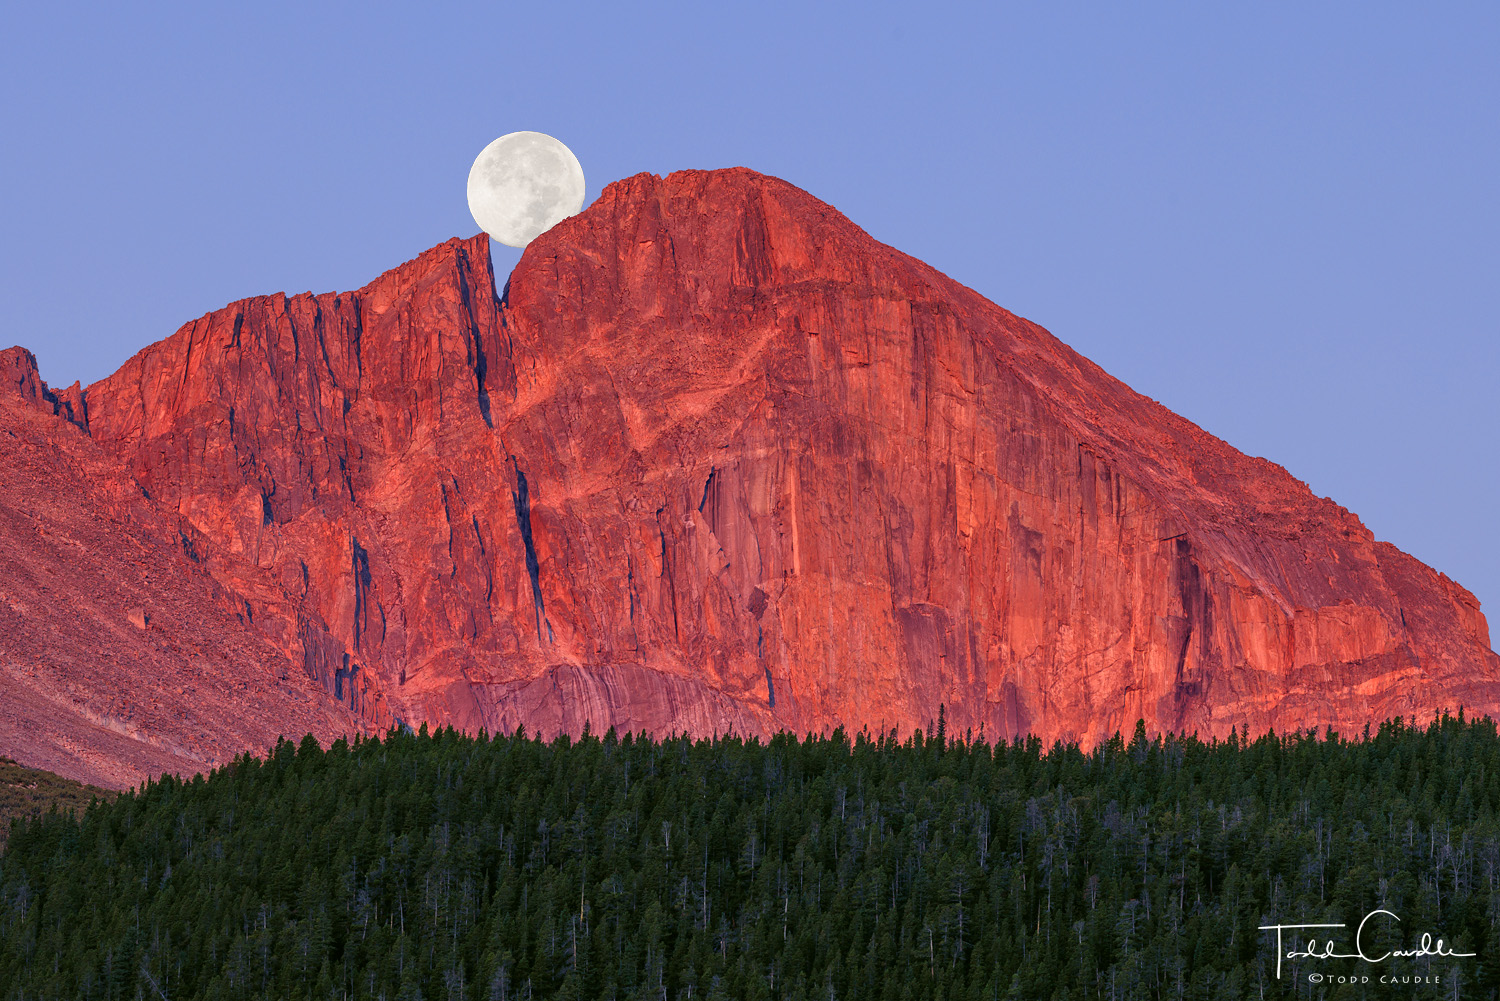 Alpenglow sunrise light paints The Diamond on Longs Peak in red hues as the moon sets behind The Notch.